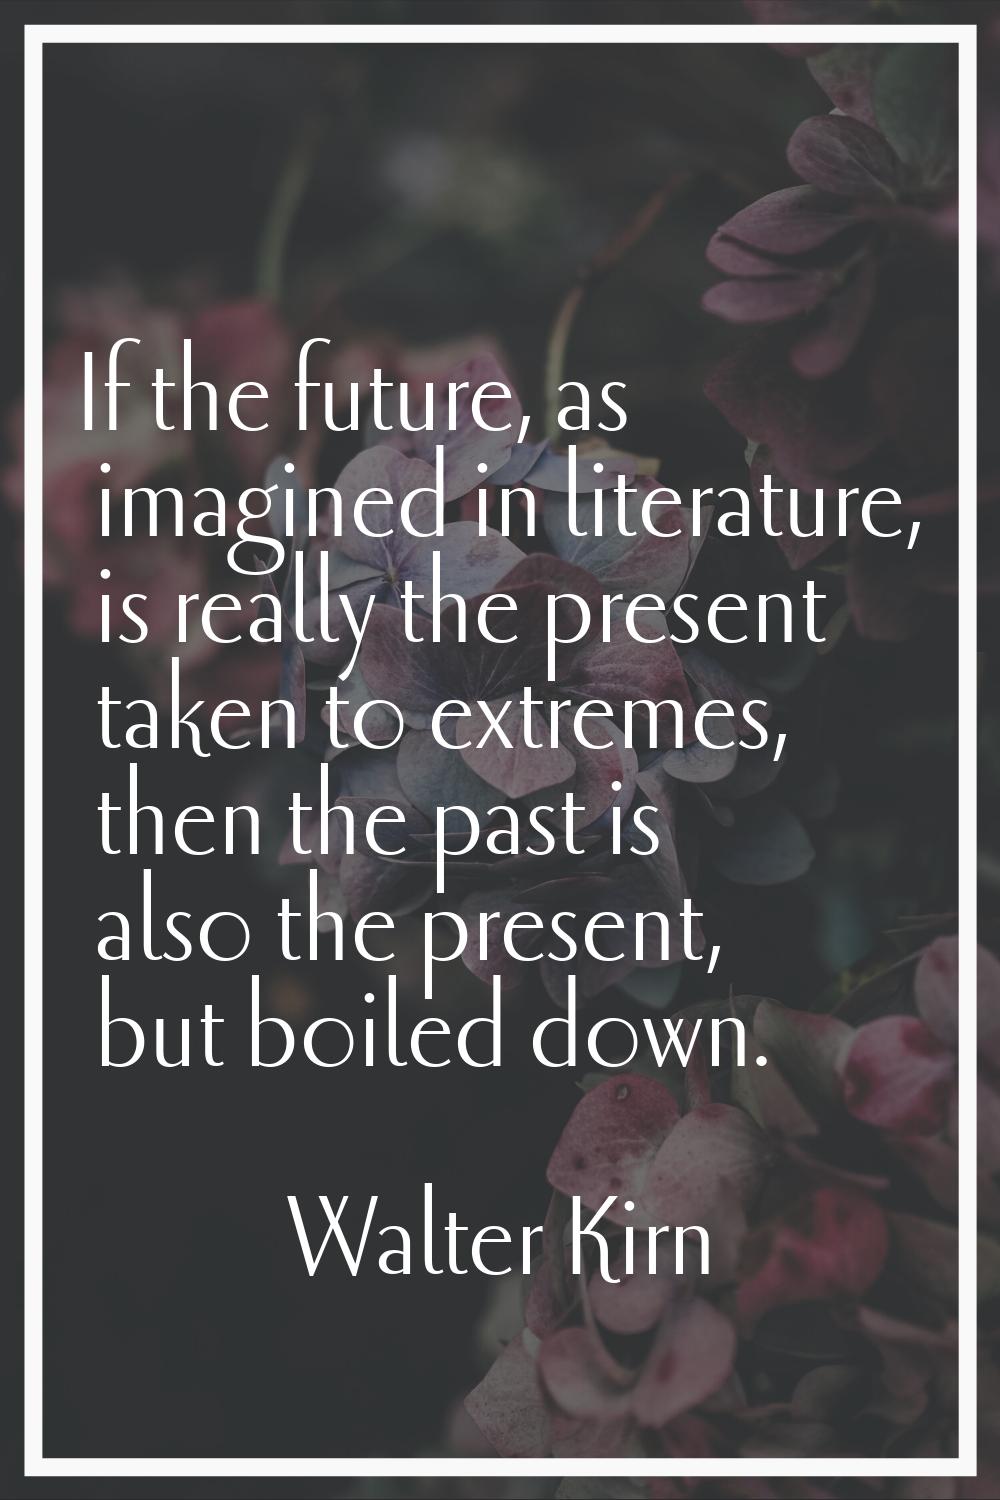 If the future, as imagined in literature, is really the present taken to extremes, then the past is